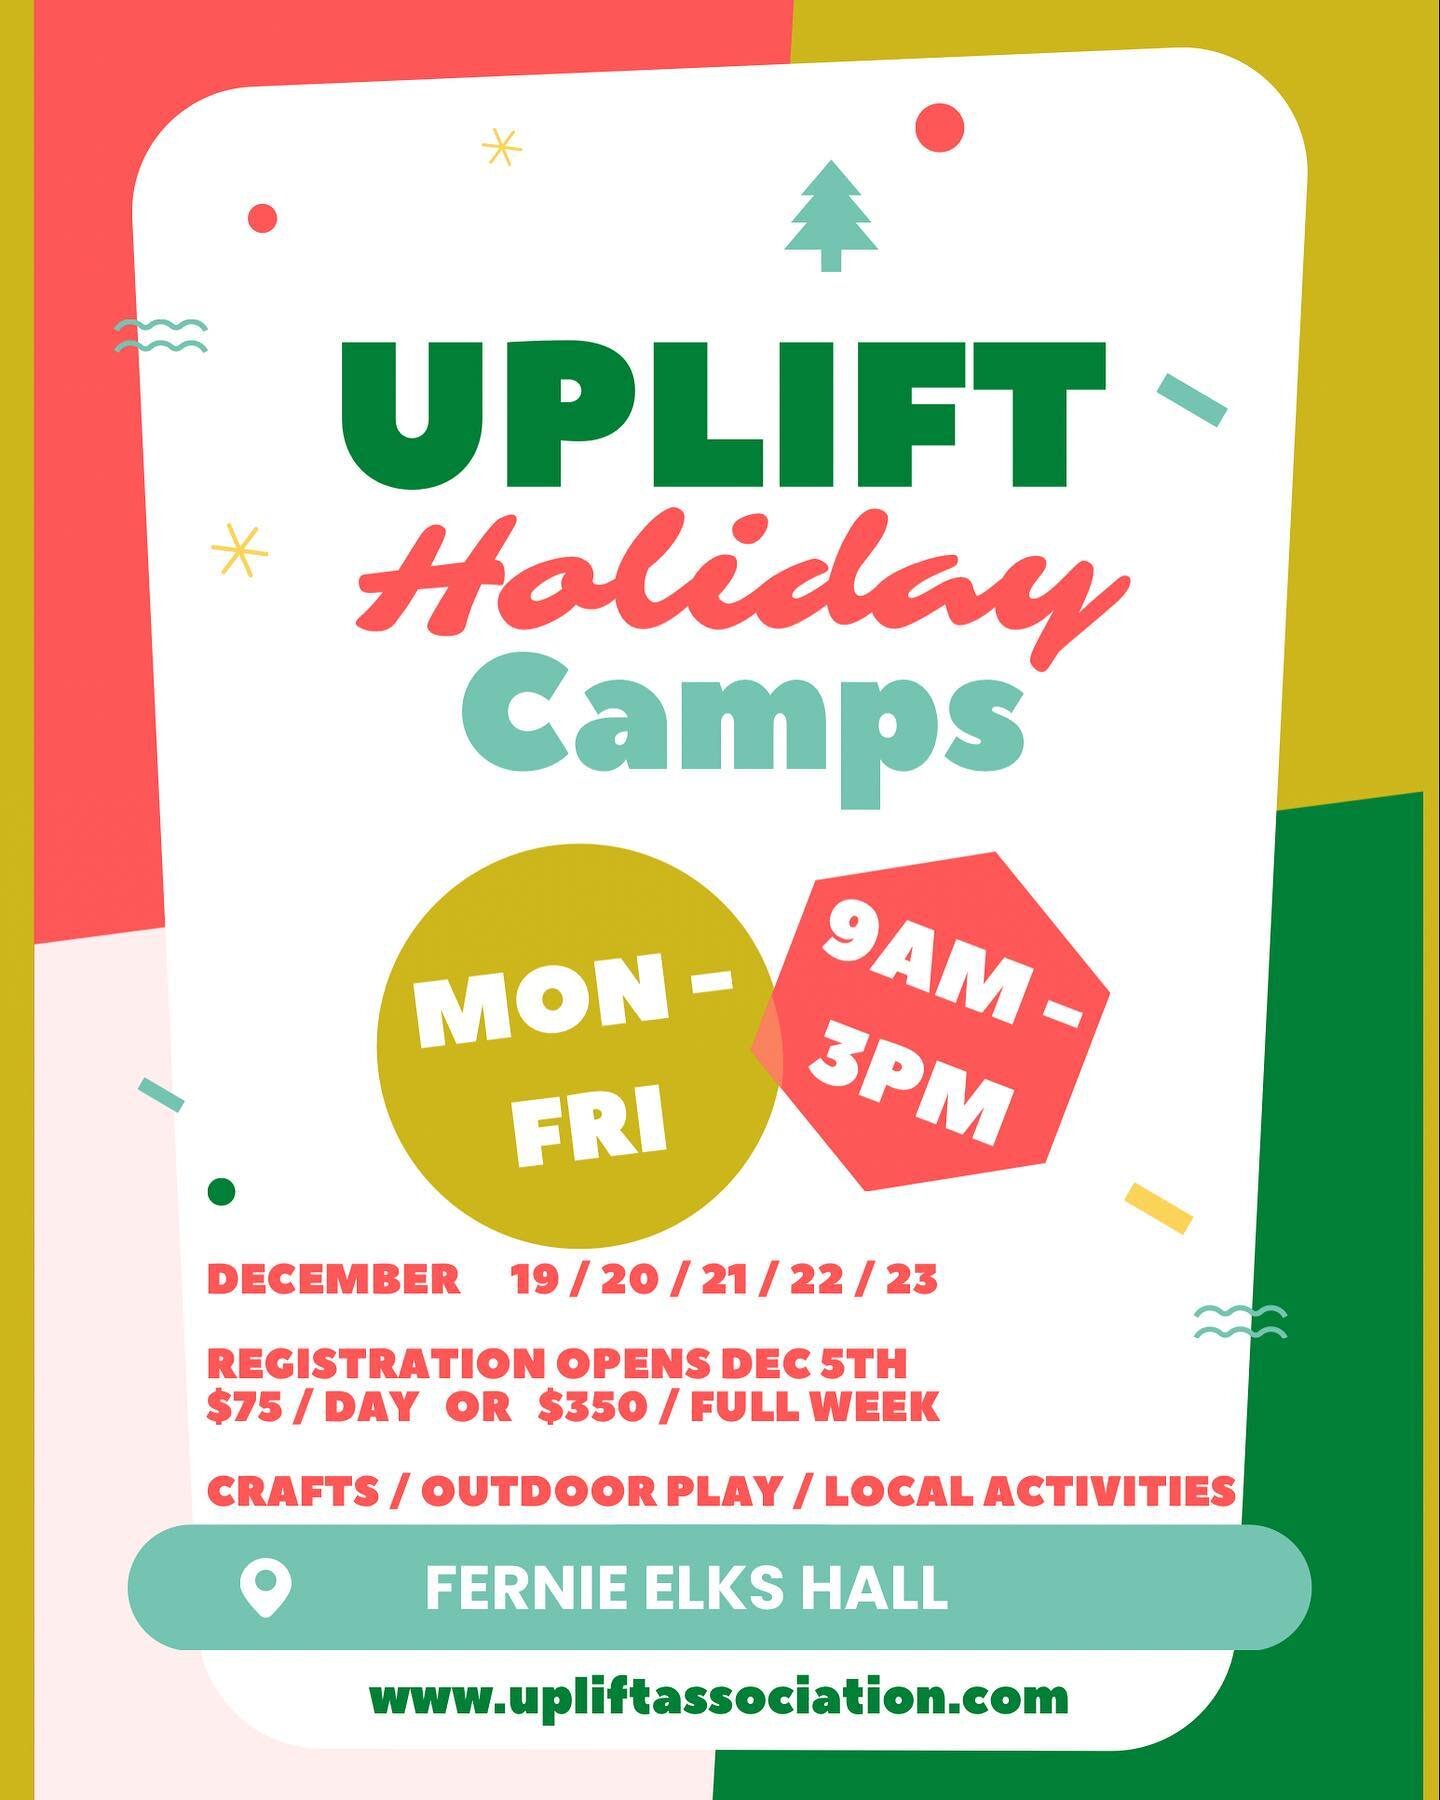 UPLIFT HOLIDAY CAMPS 🌲

KICK-OFF THE WINTER BREAK WITH UPLIFT - 

FERNIE ELKS HALL 📍 
MON - FRI 
DEC 19 / 20 / 21 / 22 / 23 
9AM - 3PM
AGES 6 - 12

Register for individual days 
$75 / day 
OR 
Register for the full week 
$350 / week 

CRAFTS / OUTD